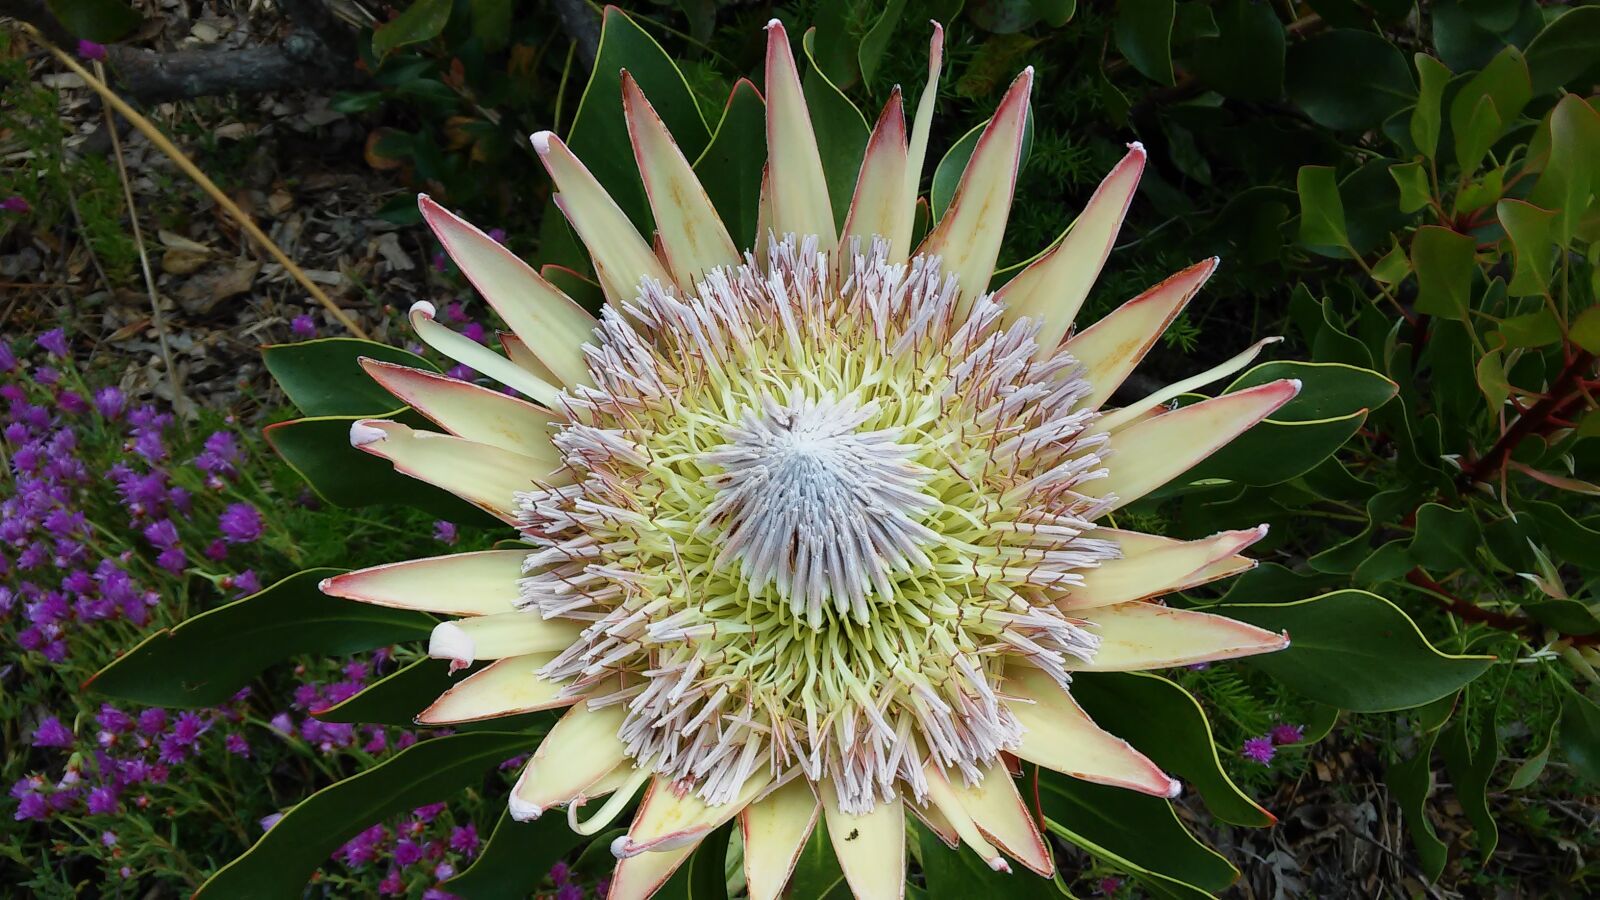 LG G2 MINI sample photo. Protea, south africa, flower photography